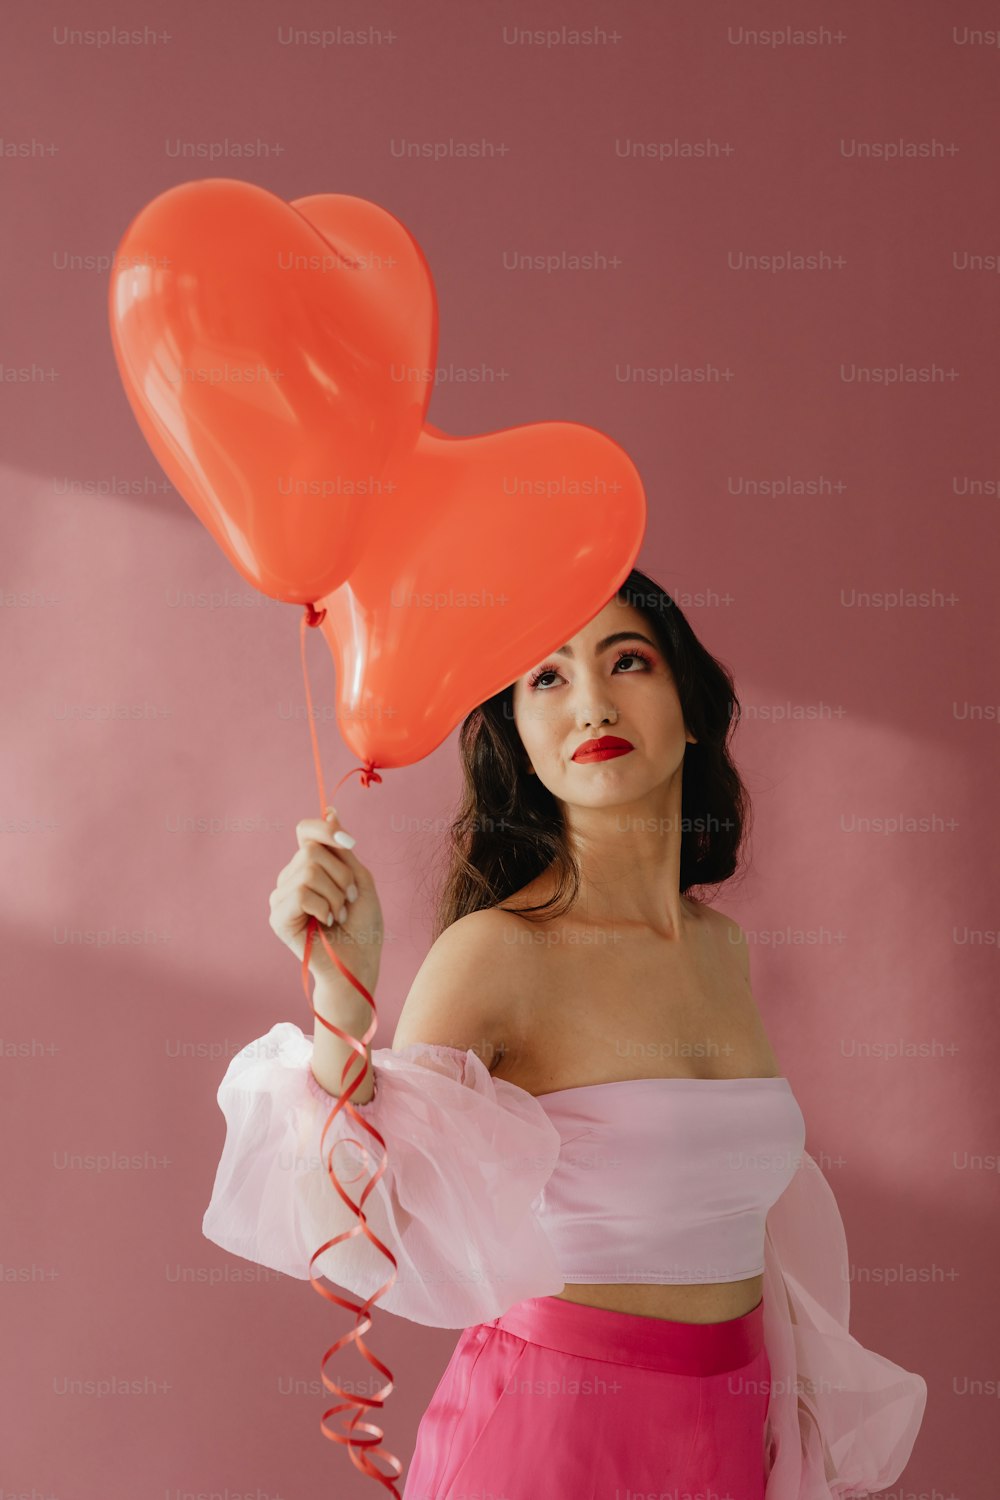 a woman in a pink dress holding a heart shaped balloon